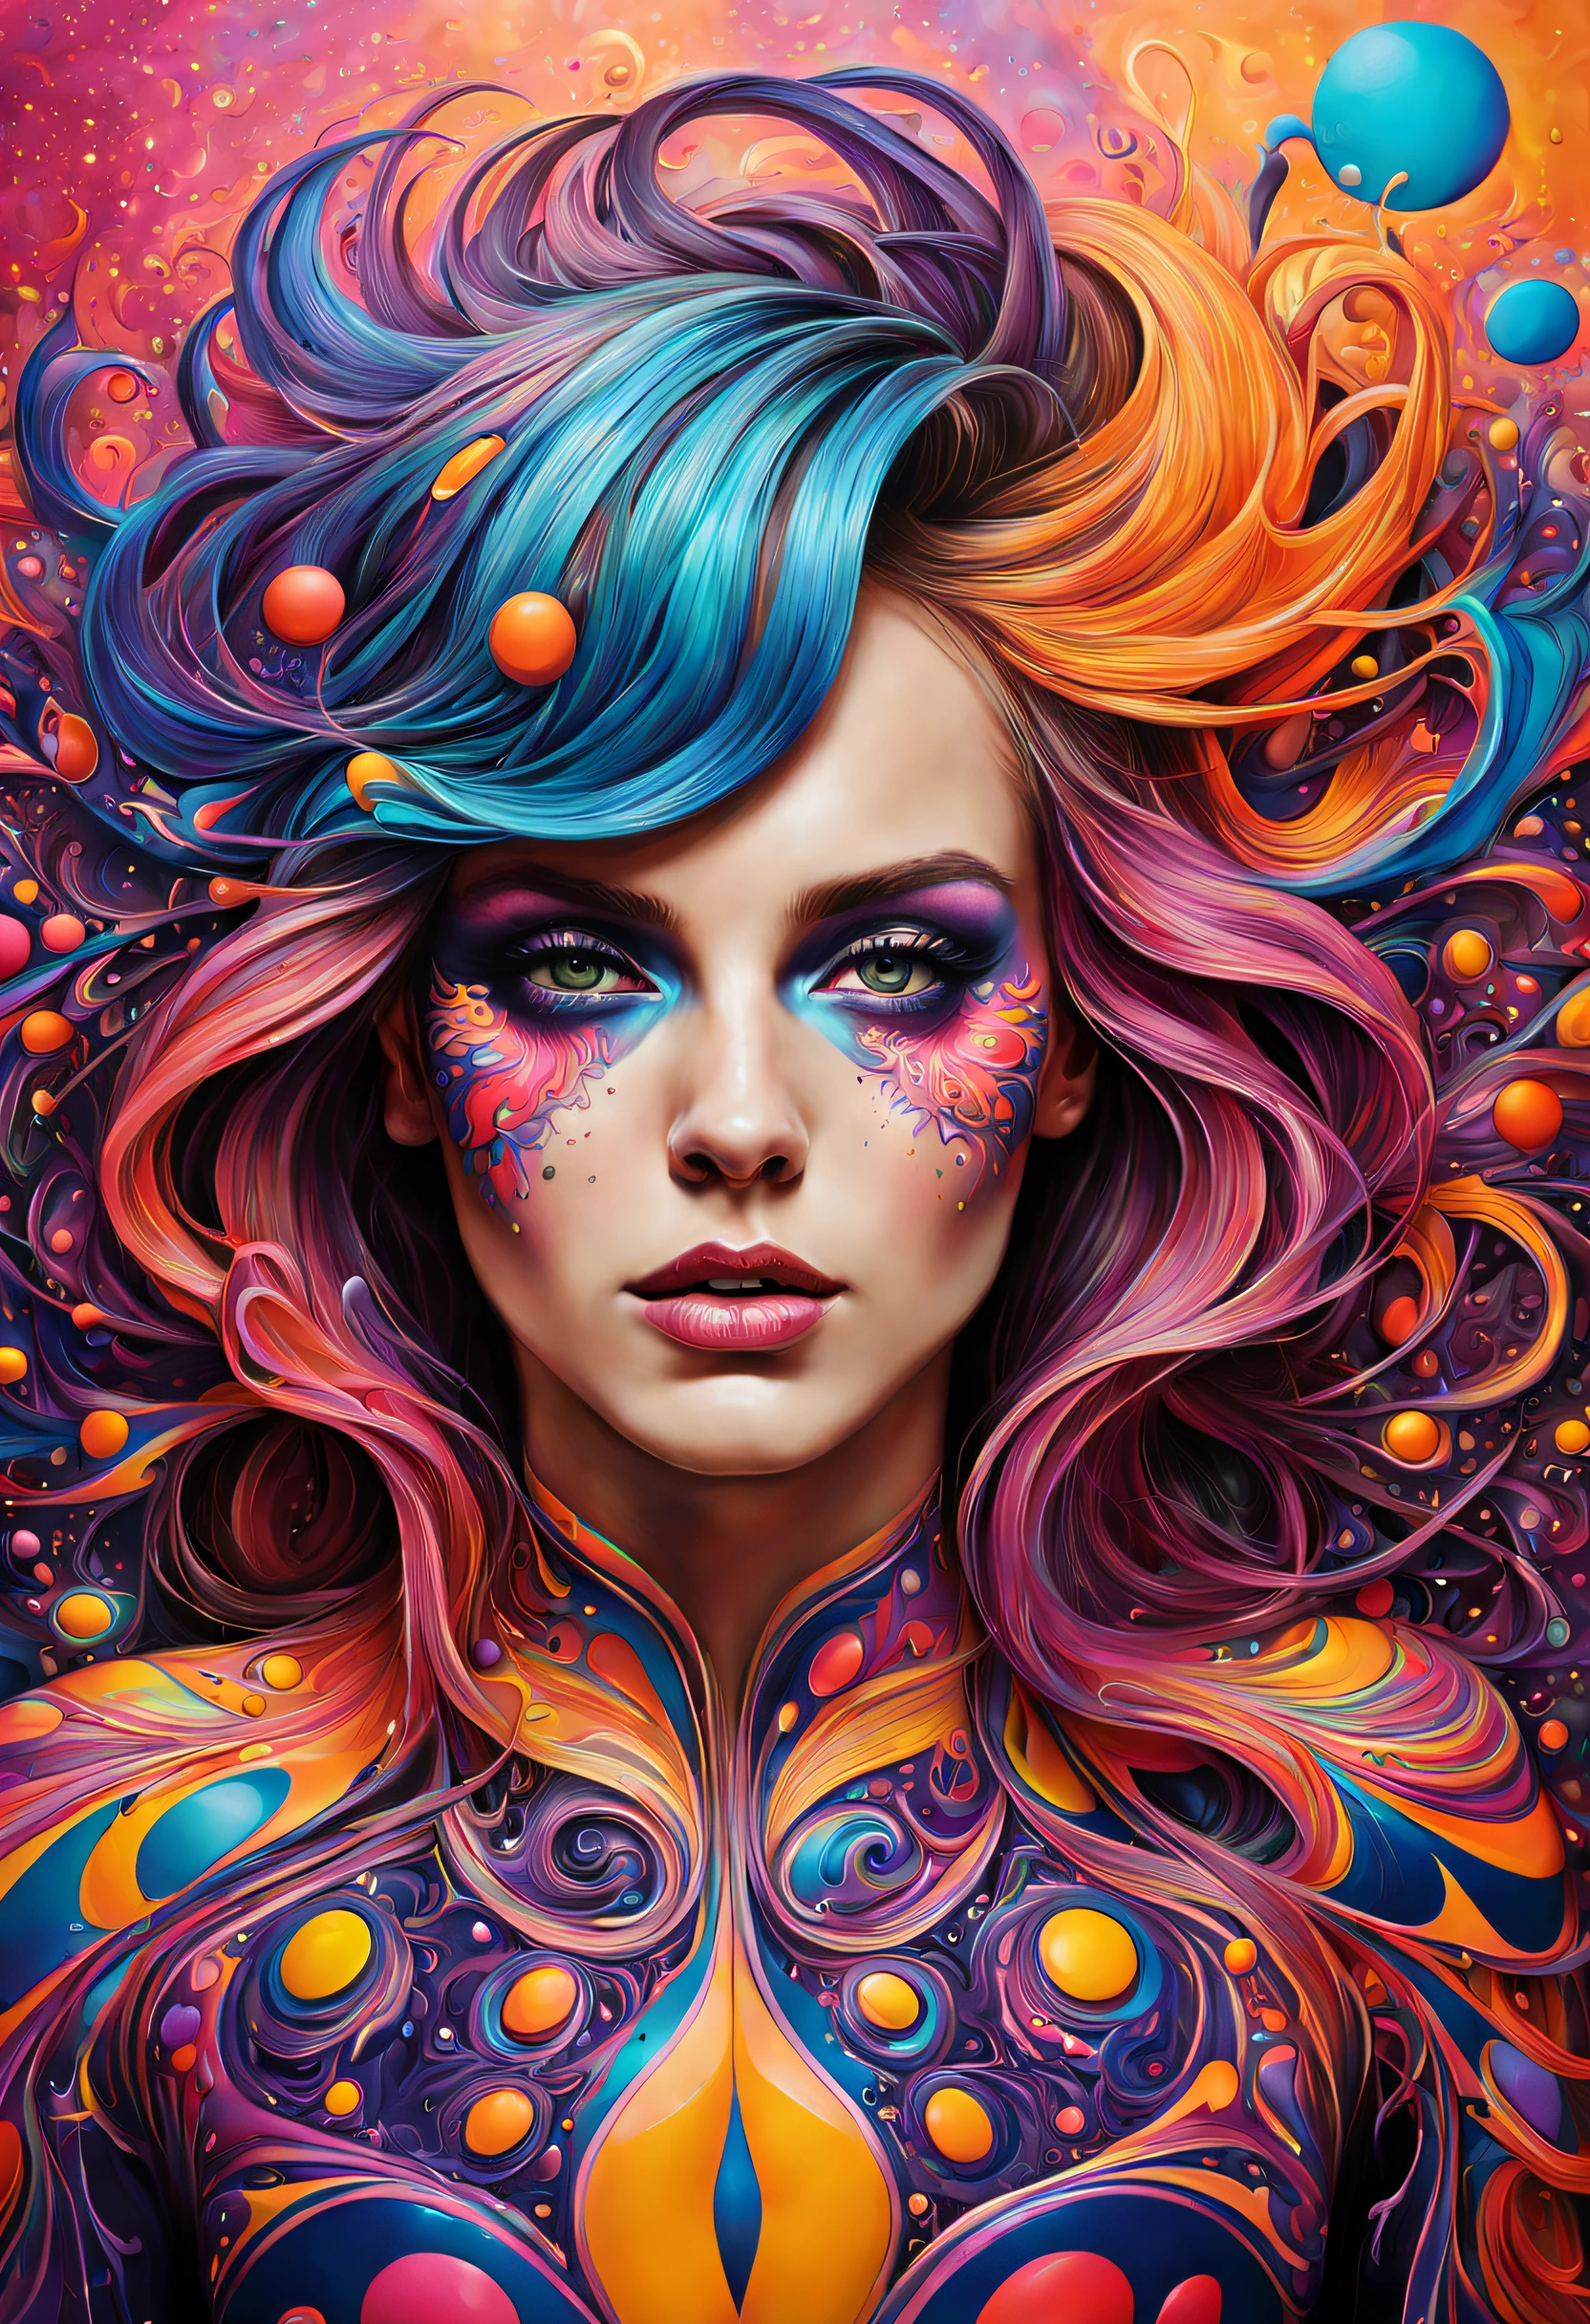 A realy realistic and psychedelic work full of flashy and brilliant color. It's textured and twisted dust